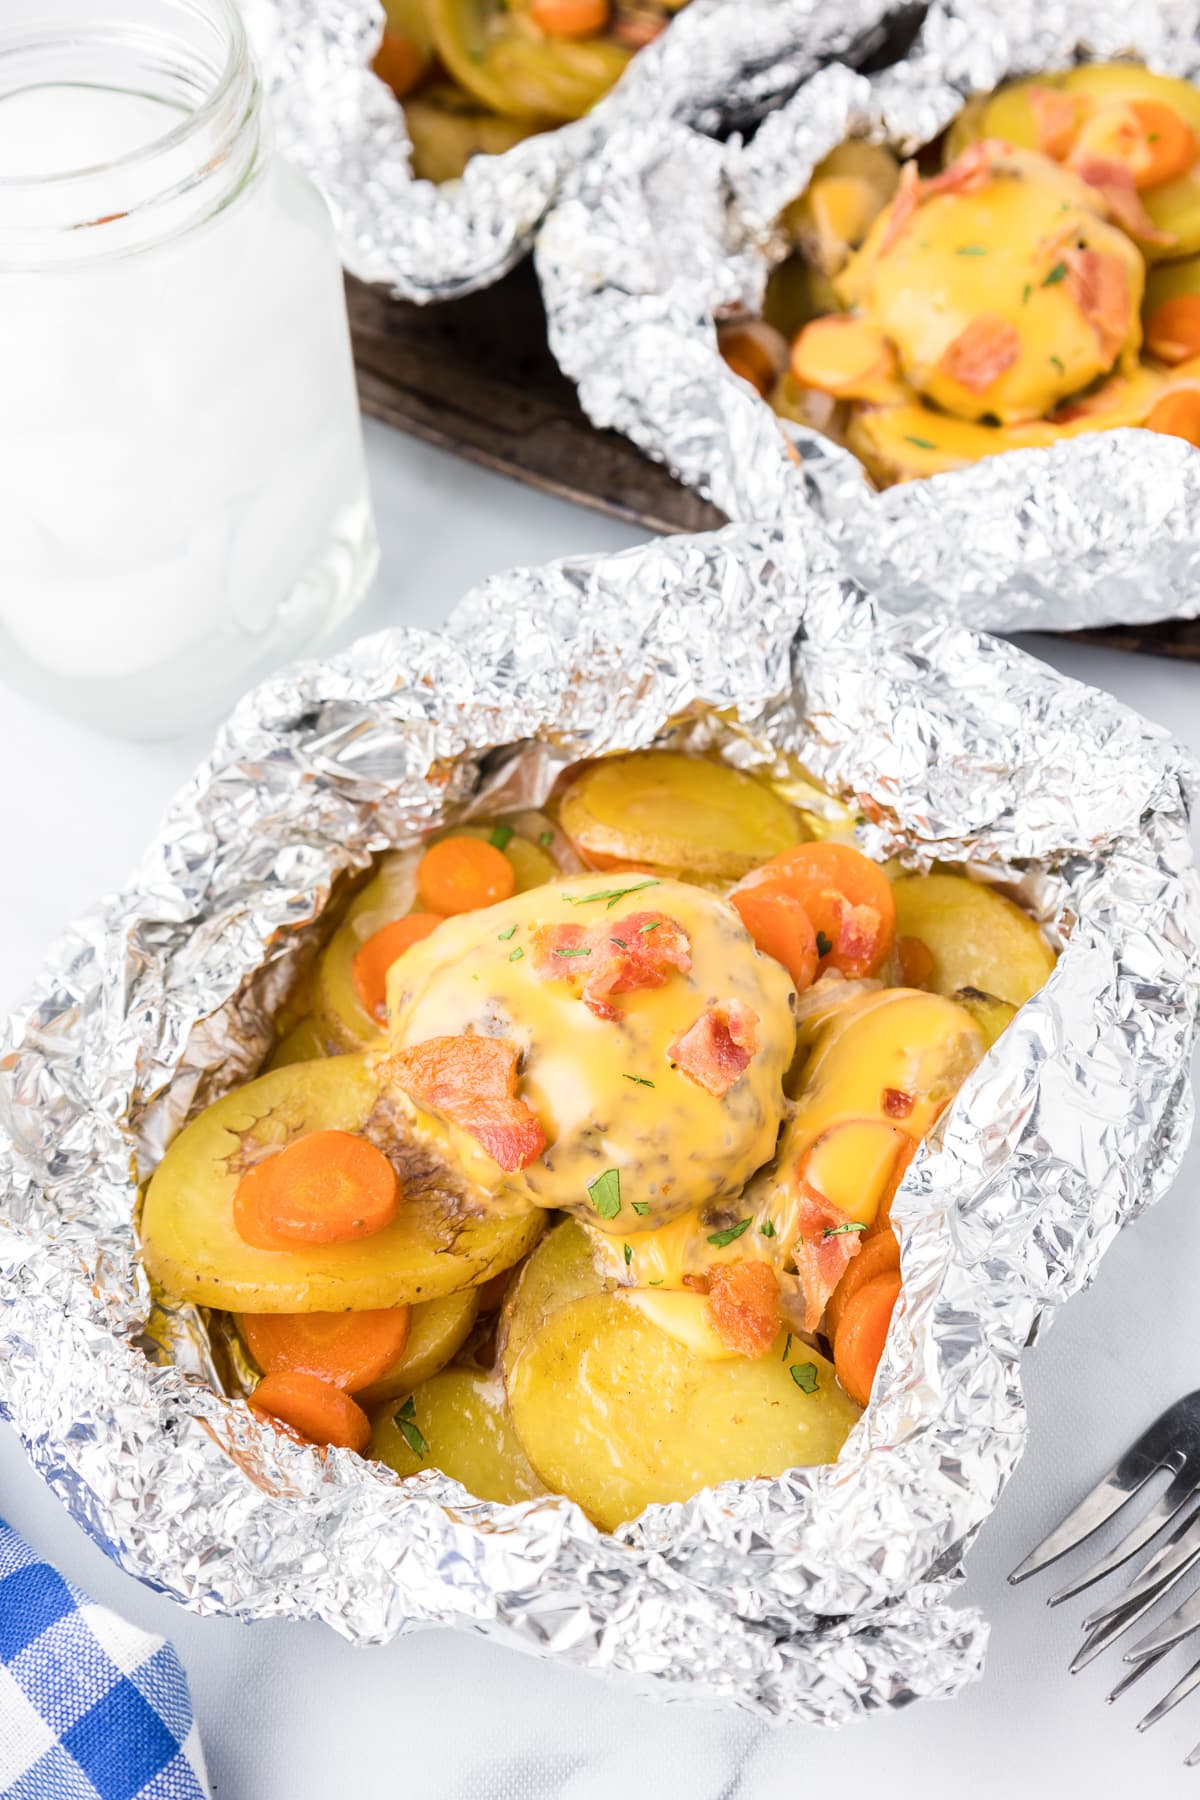 Open foil with potatoes, onions, carrots and a burger covered in cheese and chopped bacon on a table.